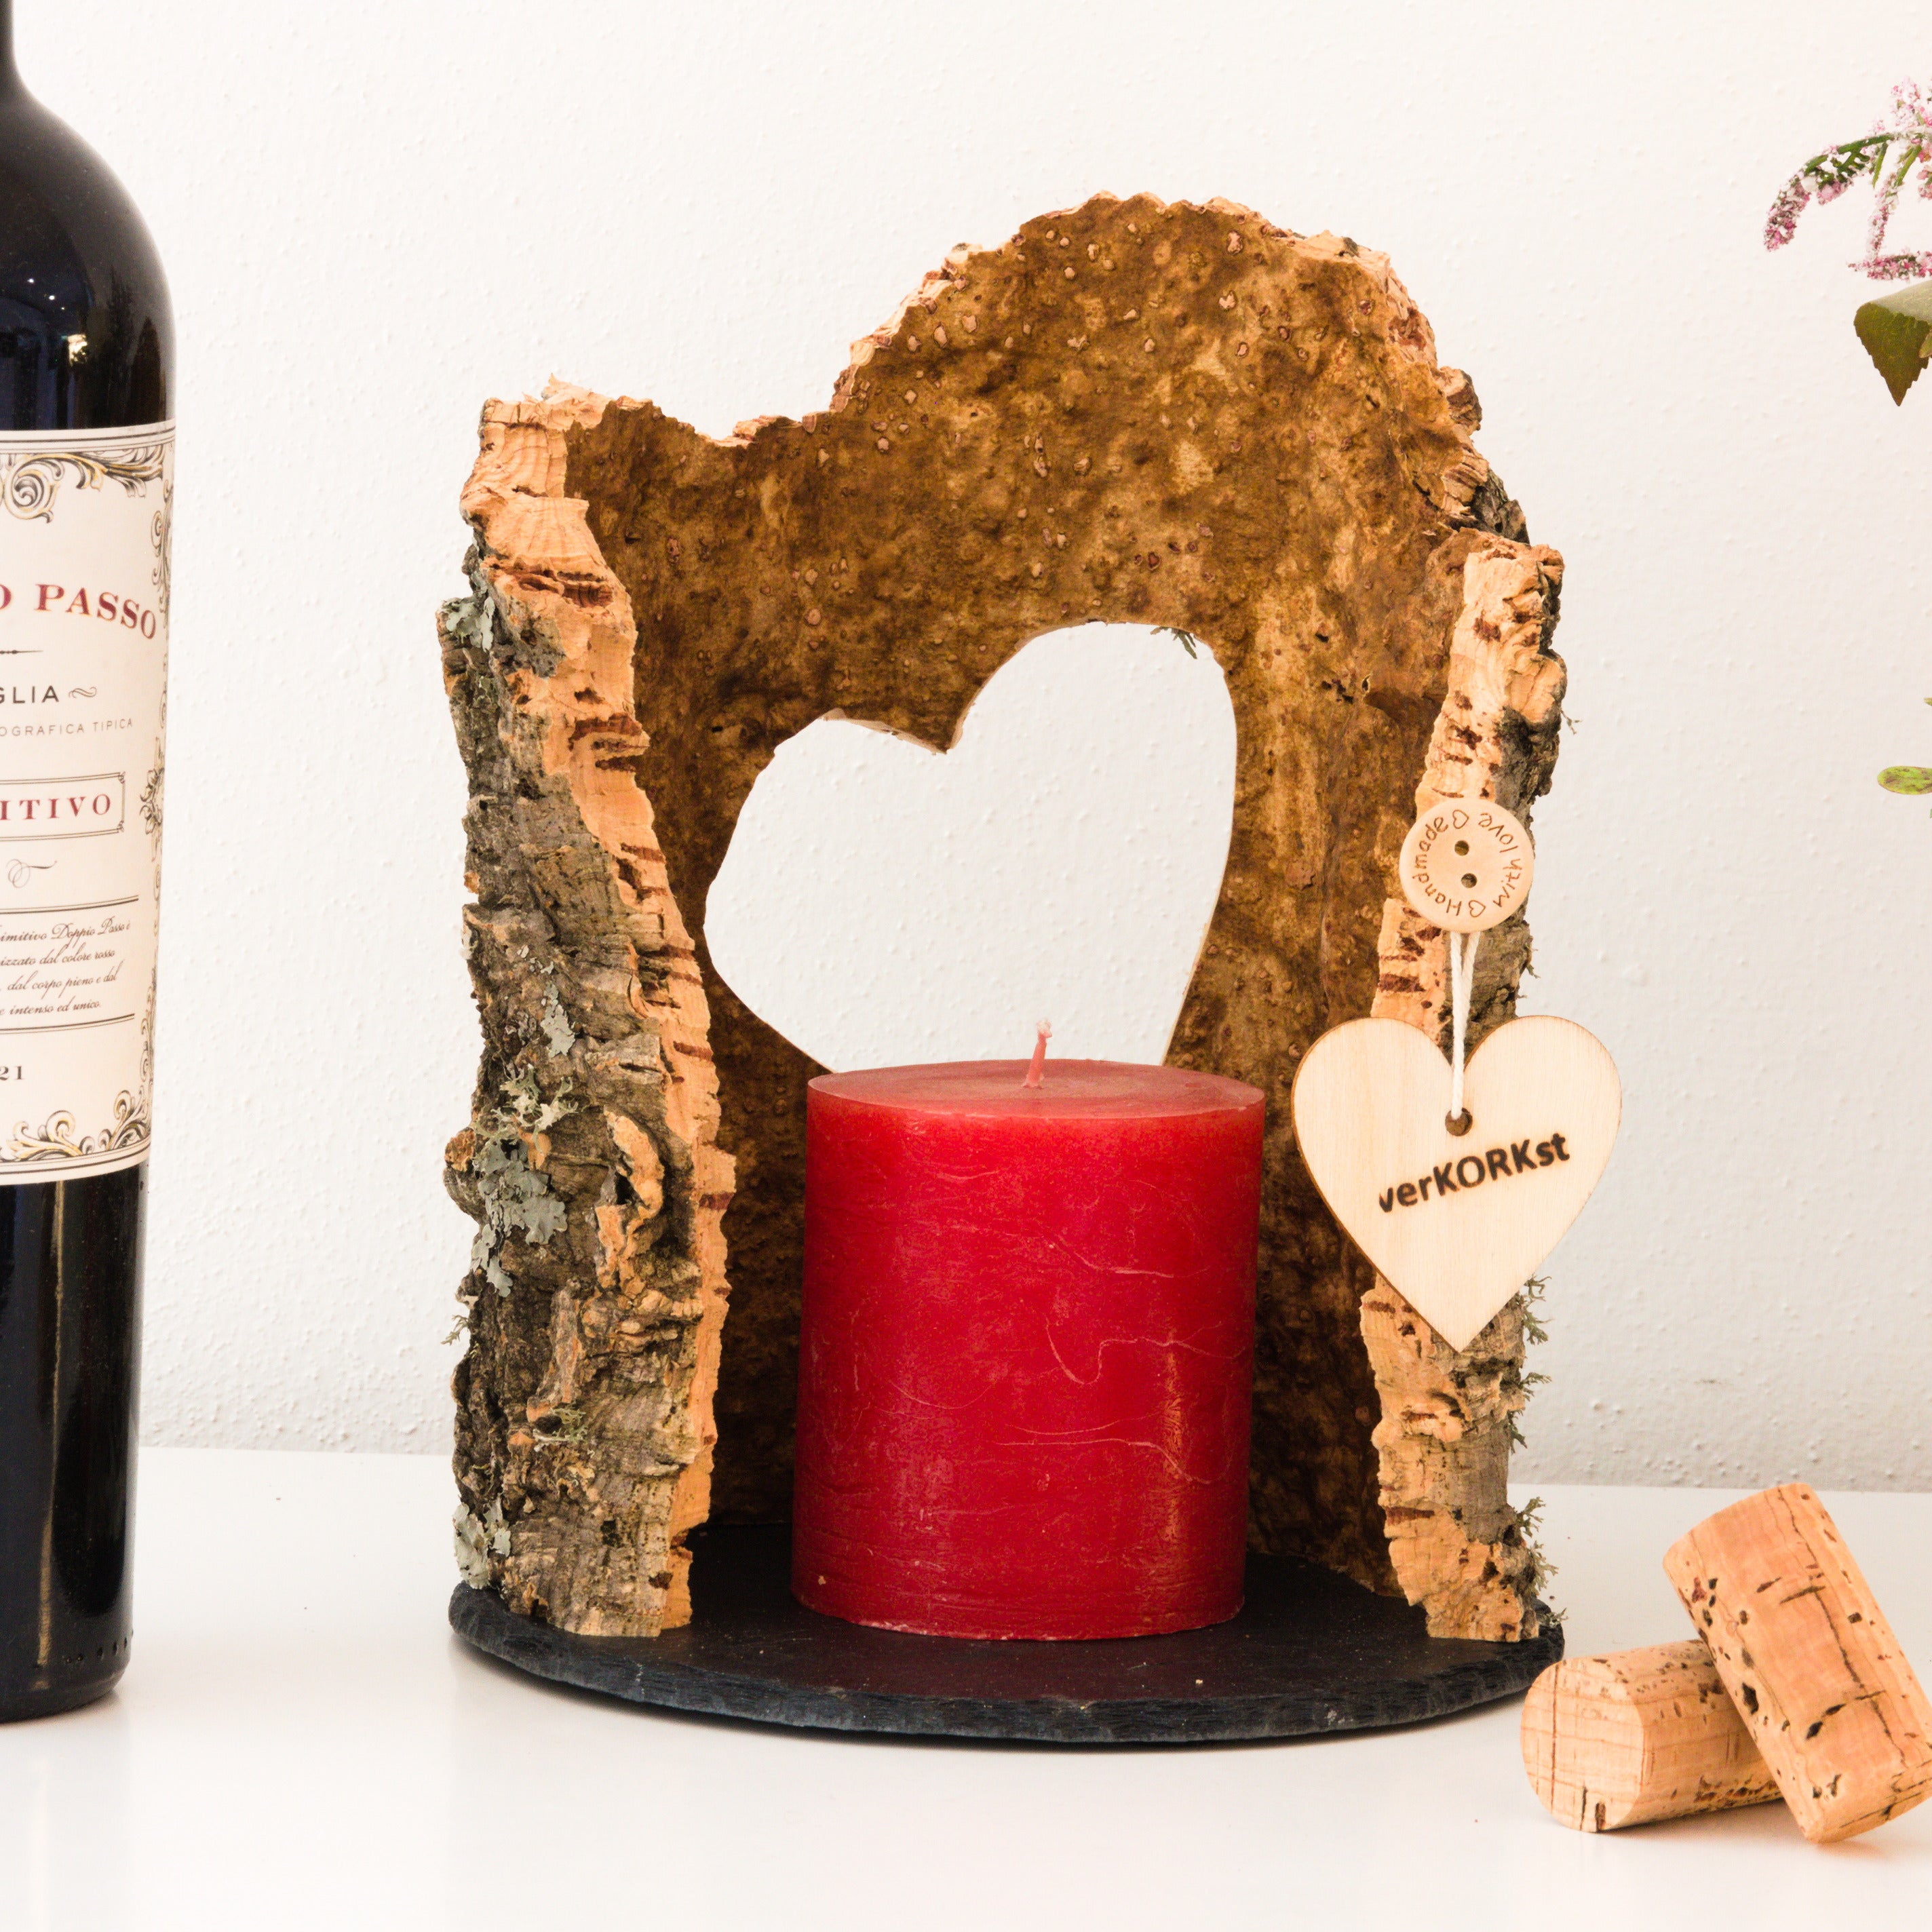 verKORKst premium cork lantern * with heart cutout * SPECIAL OFFER from EUR 46.00* candle holder * high-quality decoration for candles and wine bottles